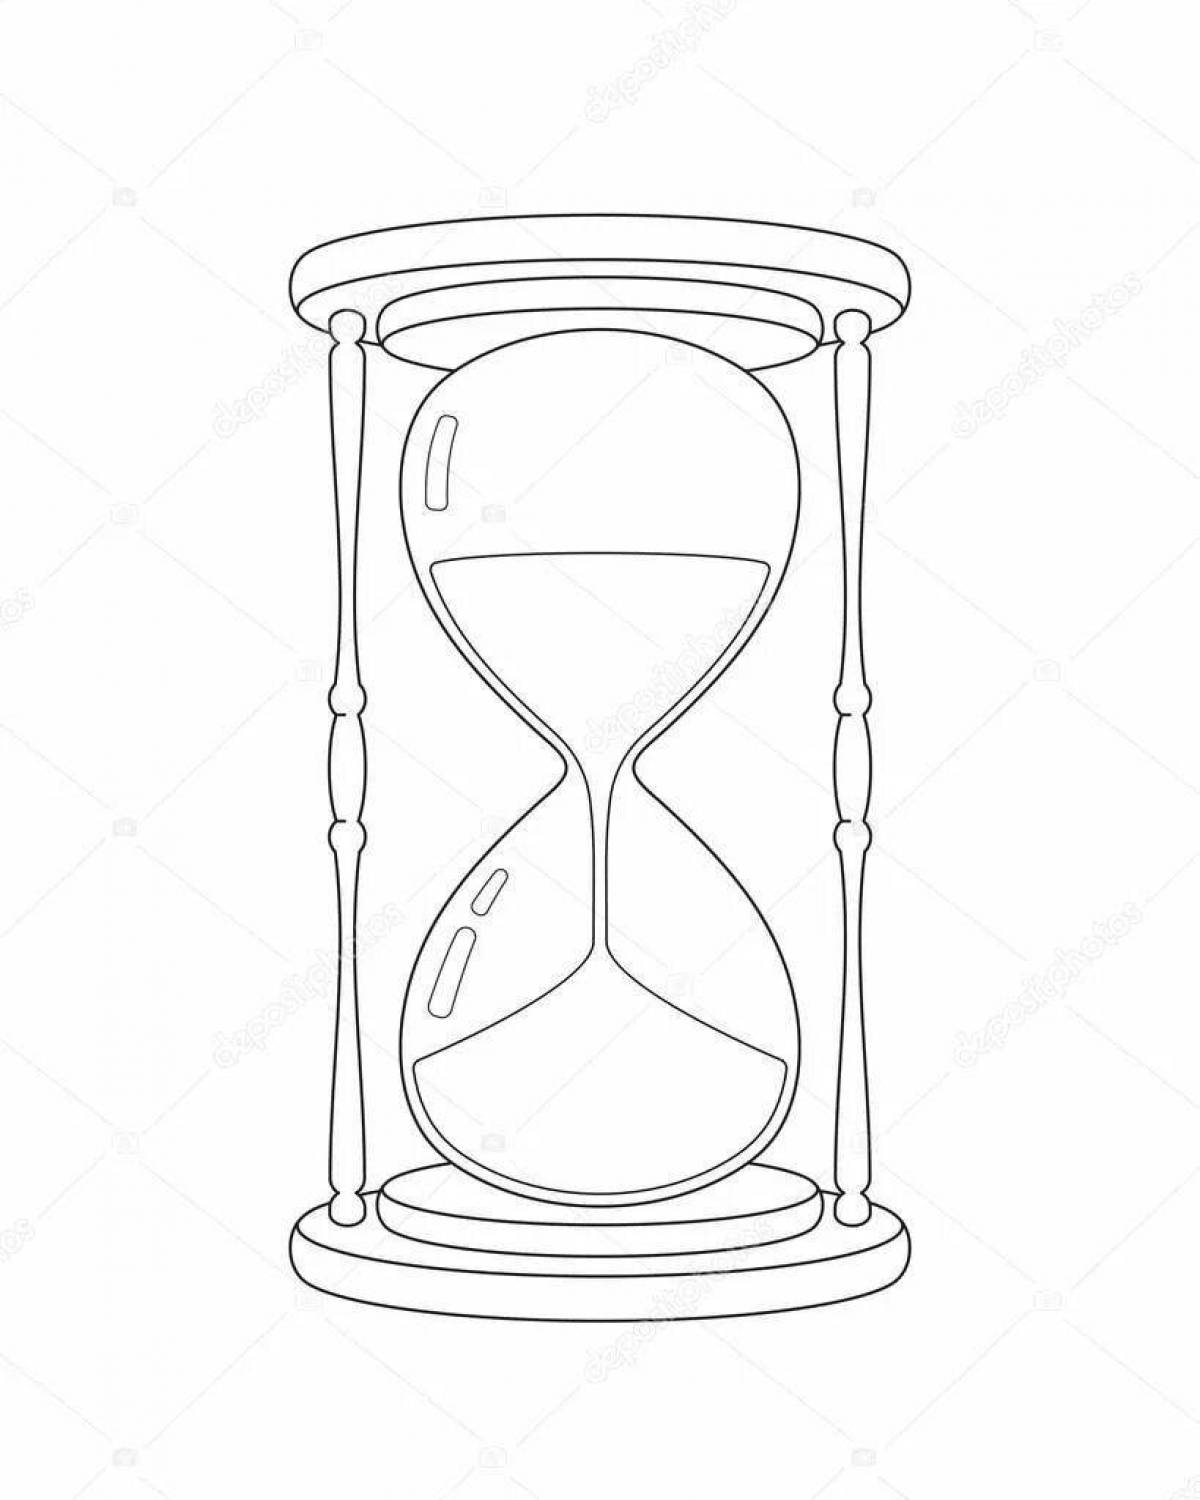 Playful hourglass coloring page